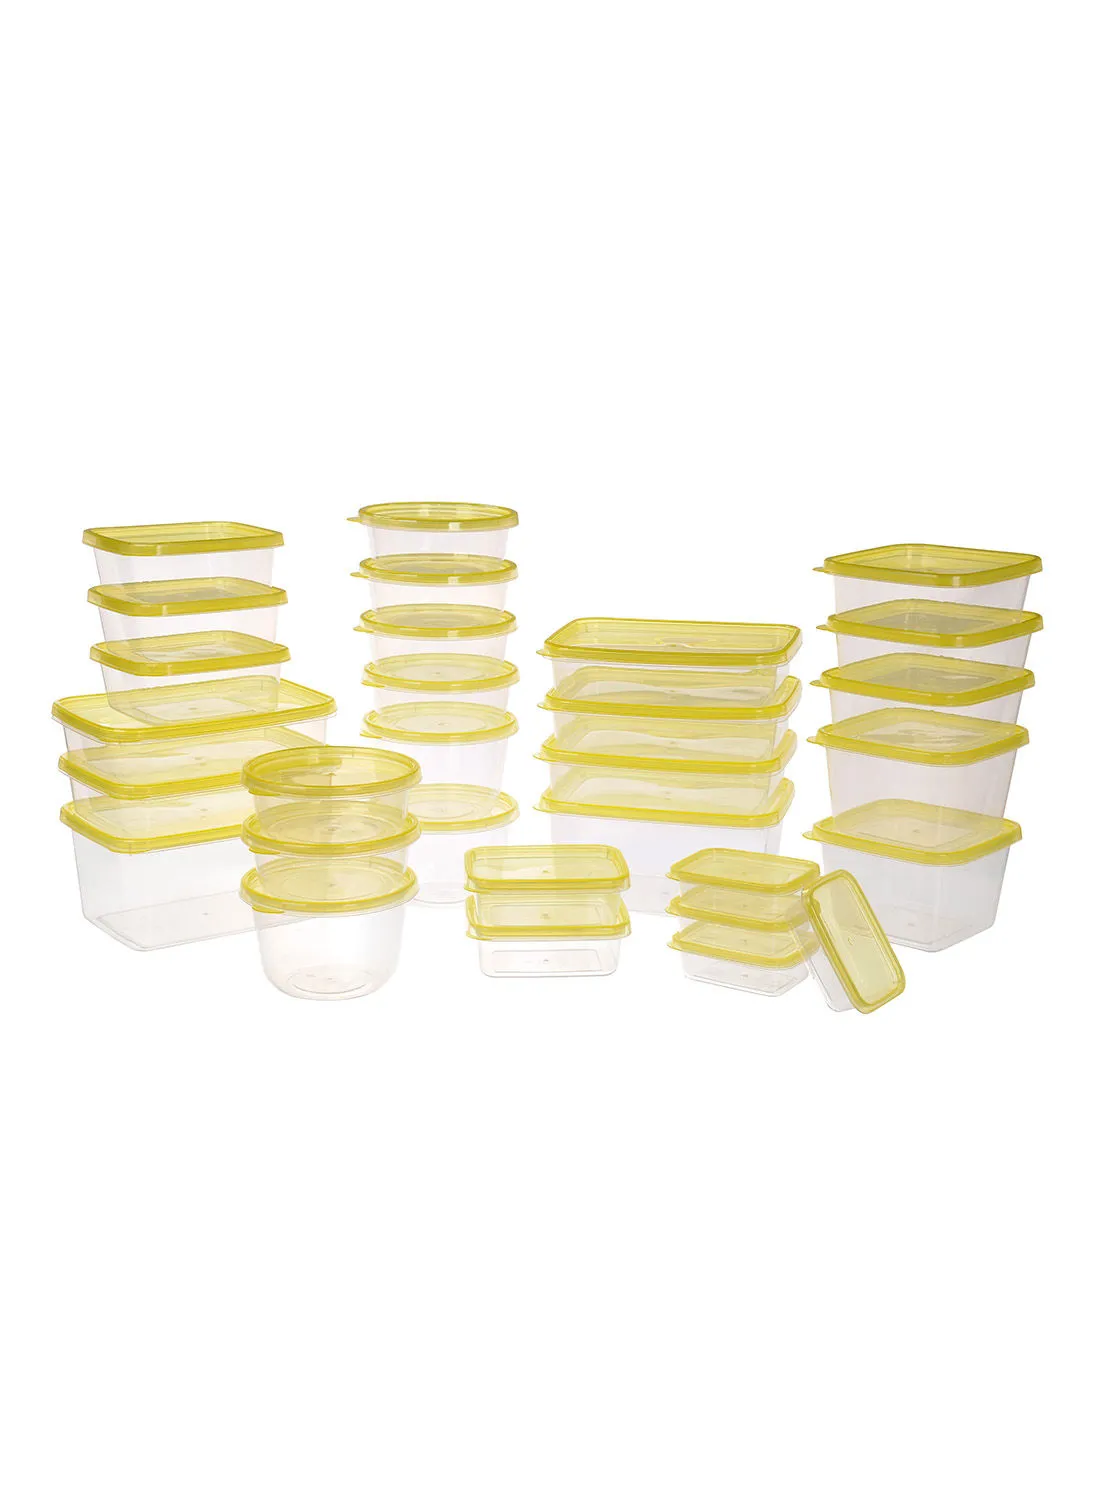 Amal 30 Piece Plastic Food Container Set - Spill Proof Lids - Food Storage Box - Storage Boxes - Kitchen Cabinet Organizers - Yellow